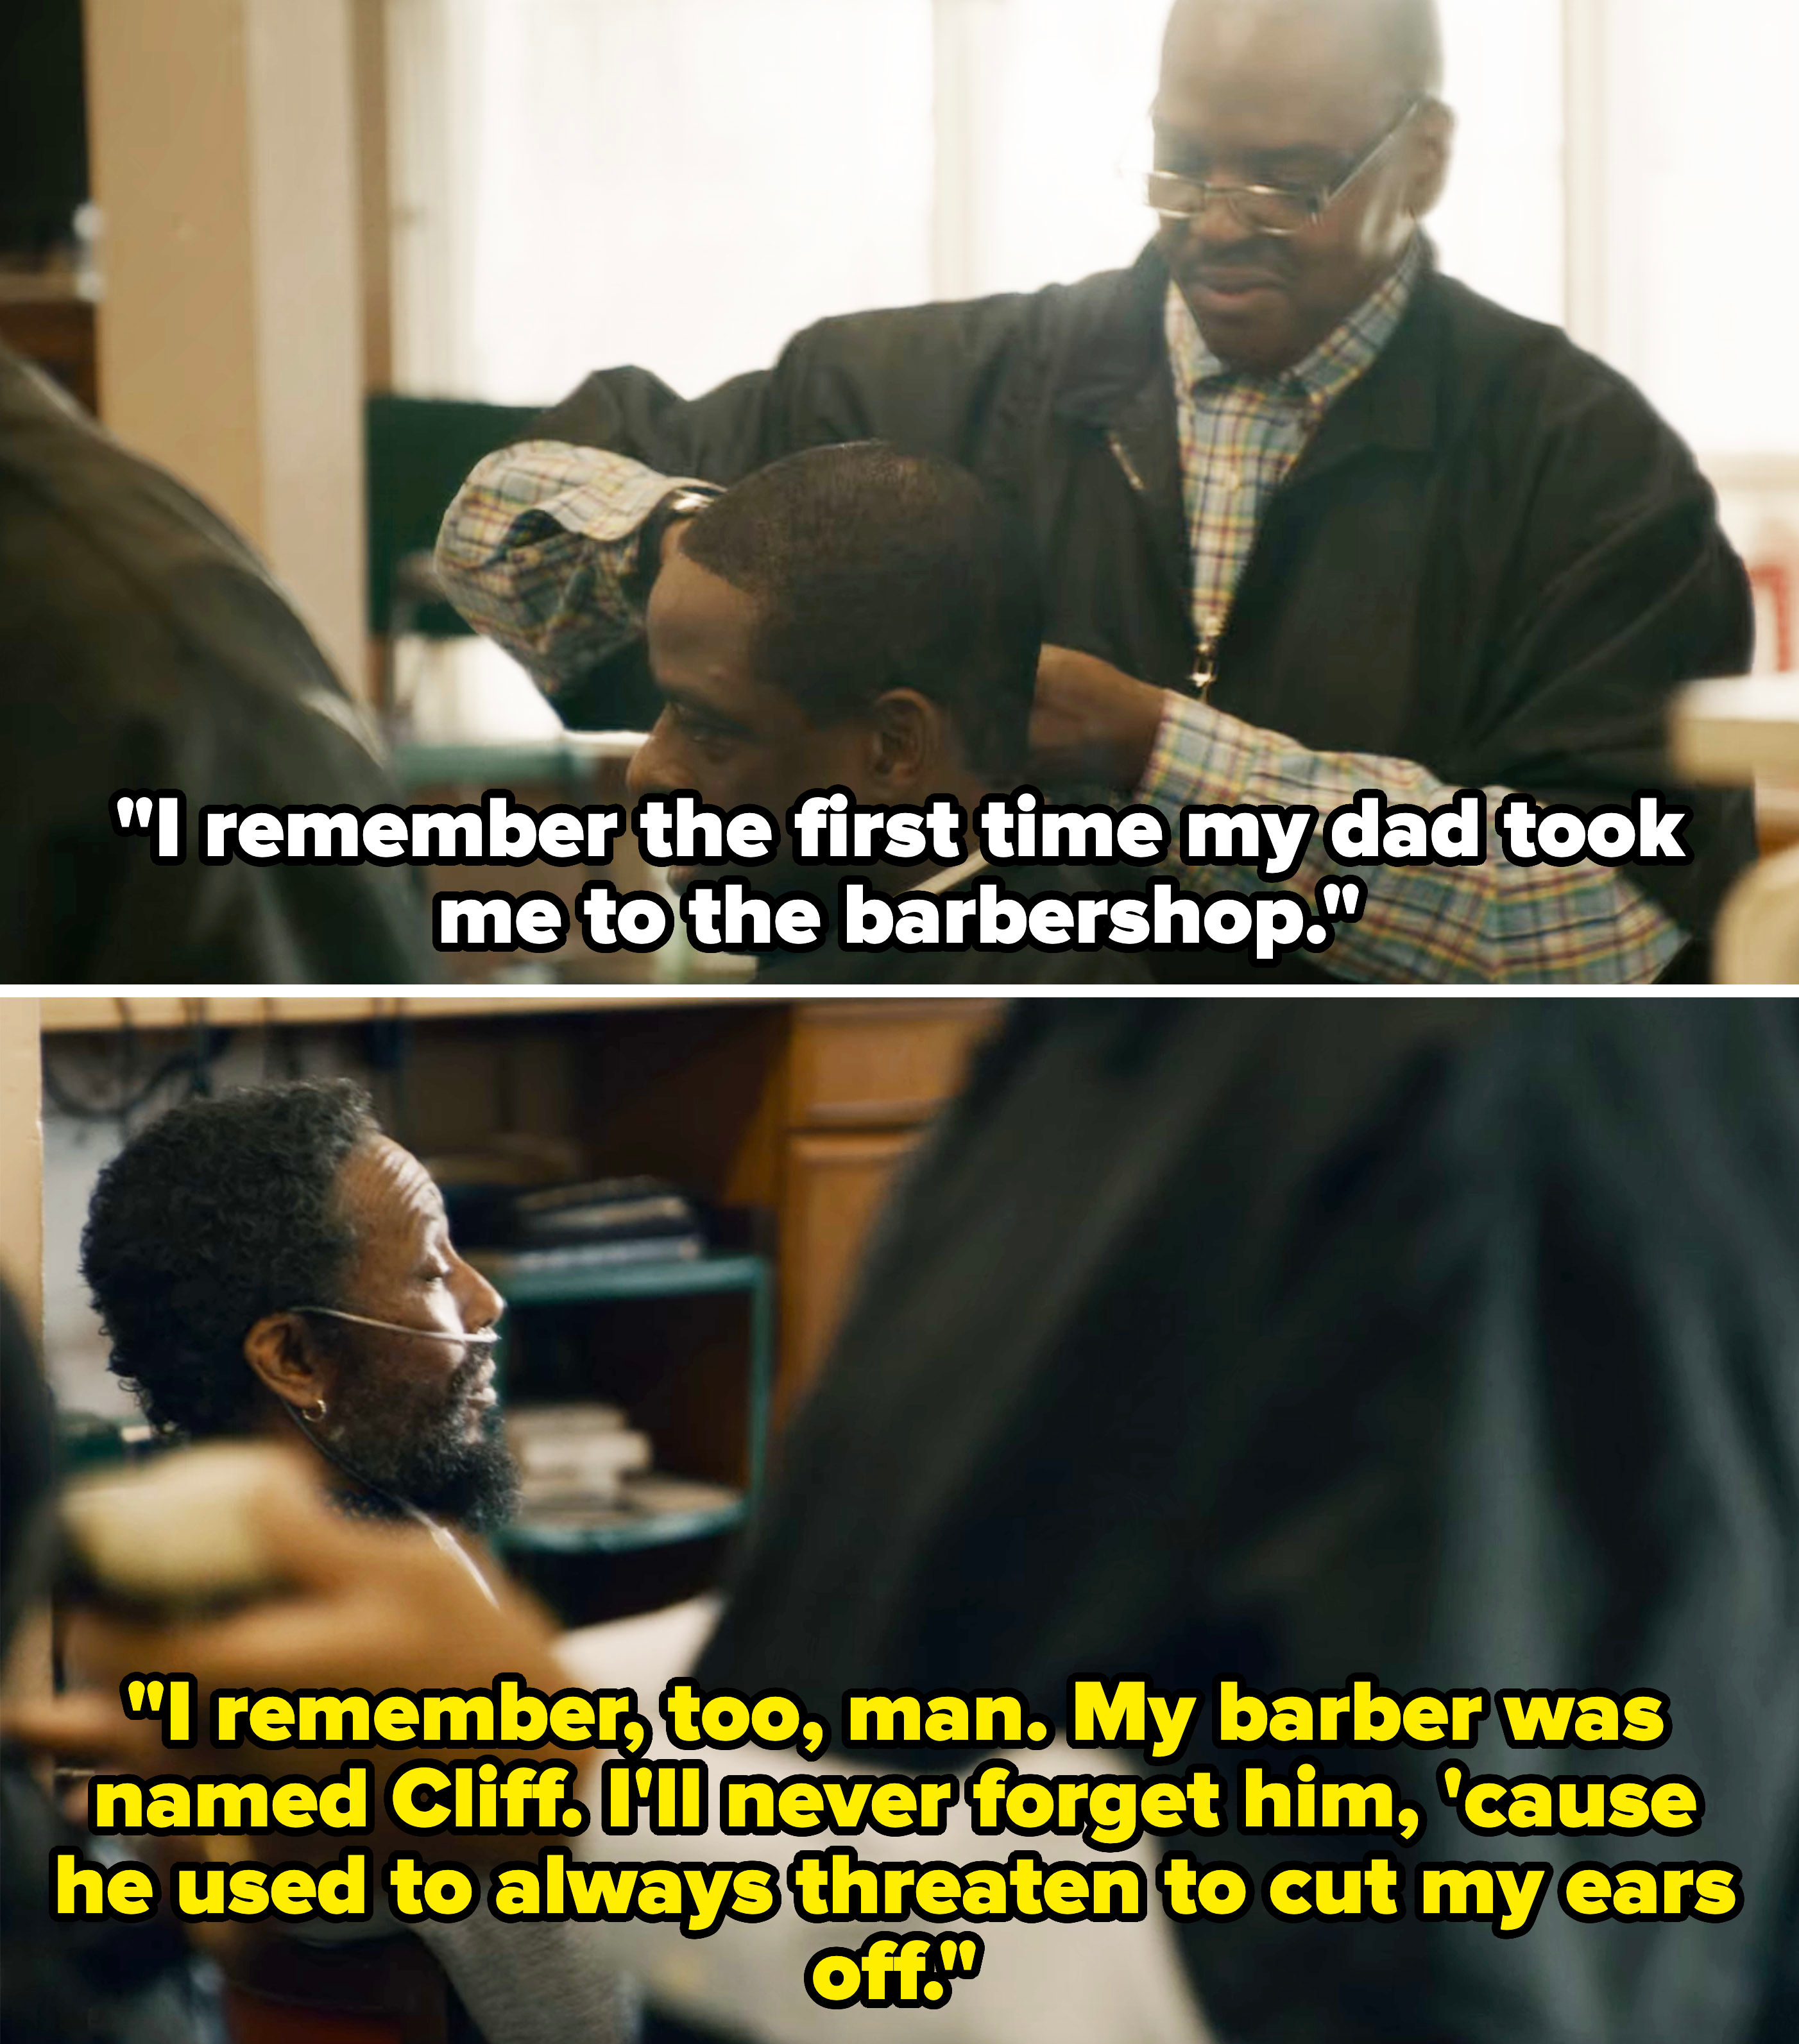 William saying his first barber was named Cliff and he&#x27;ll always remember him